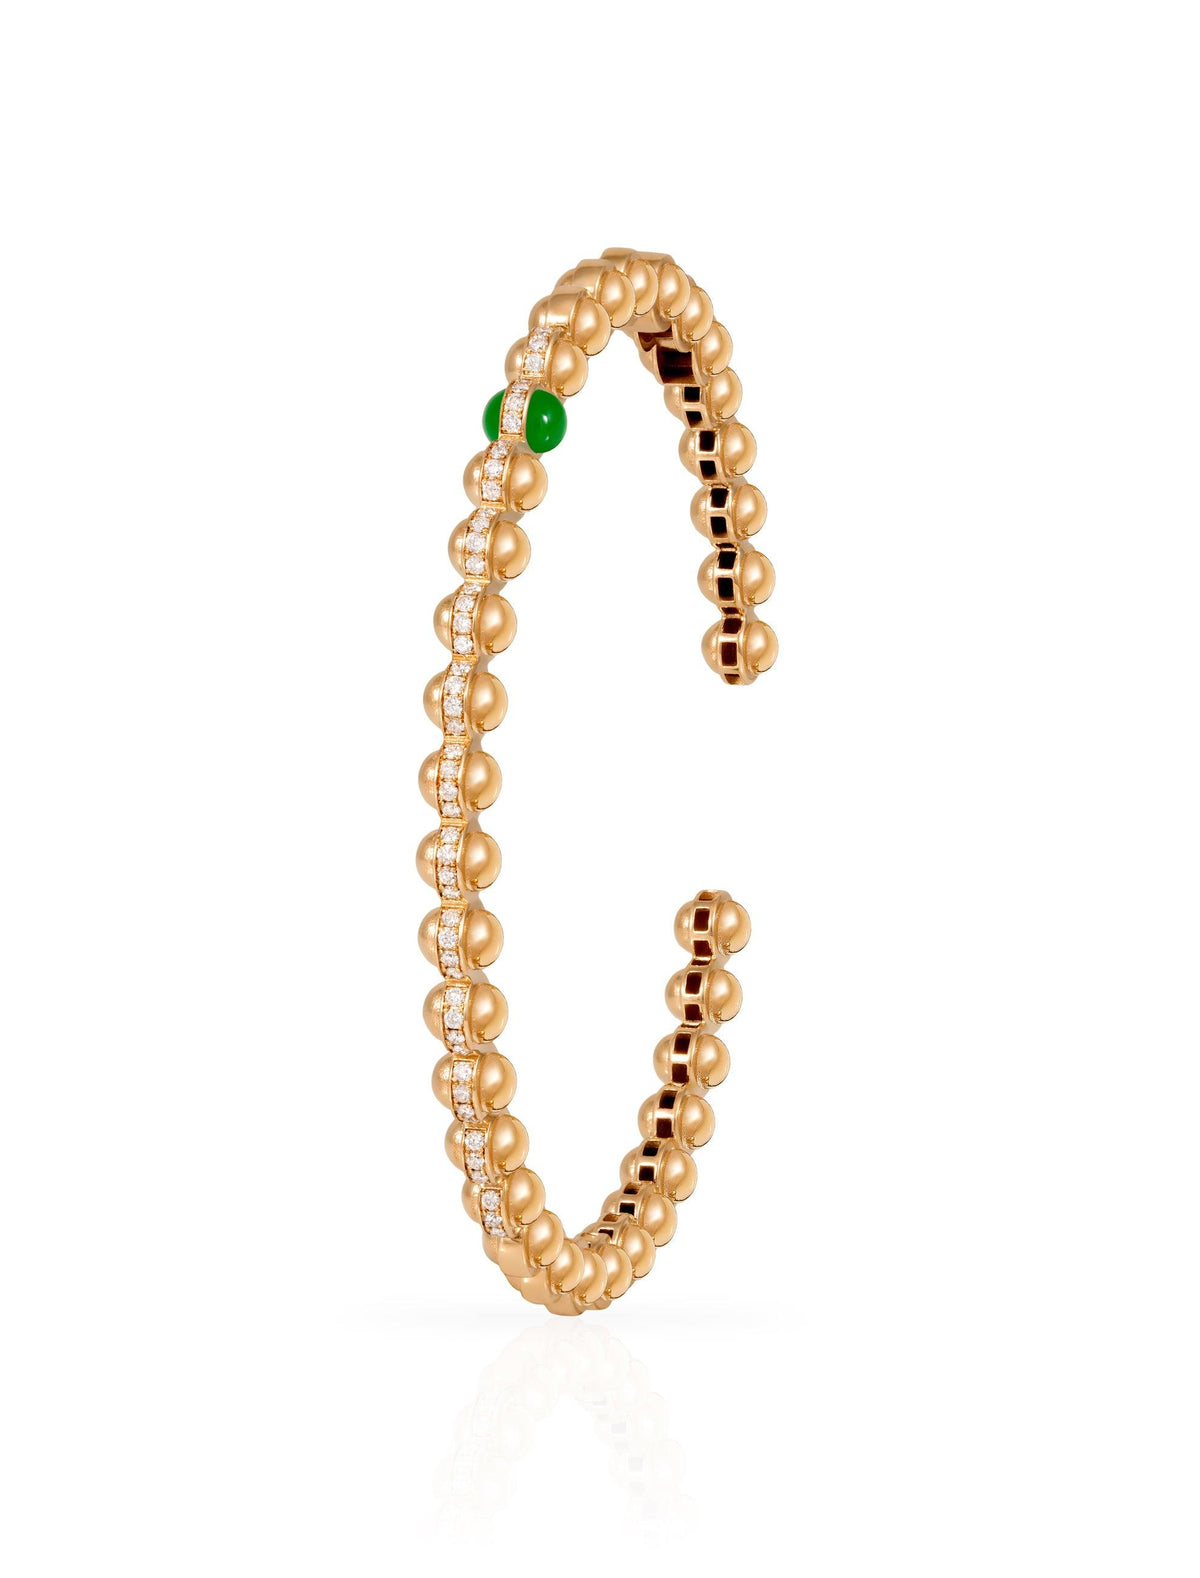 The Chlorine Gold Bangle by L'Atelier Nawbar (Size 1) - Tales of Stones